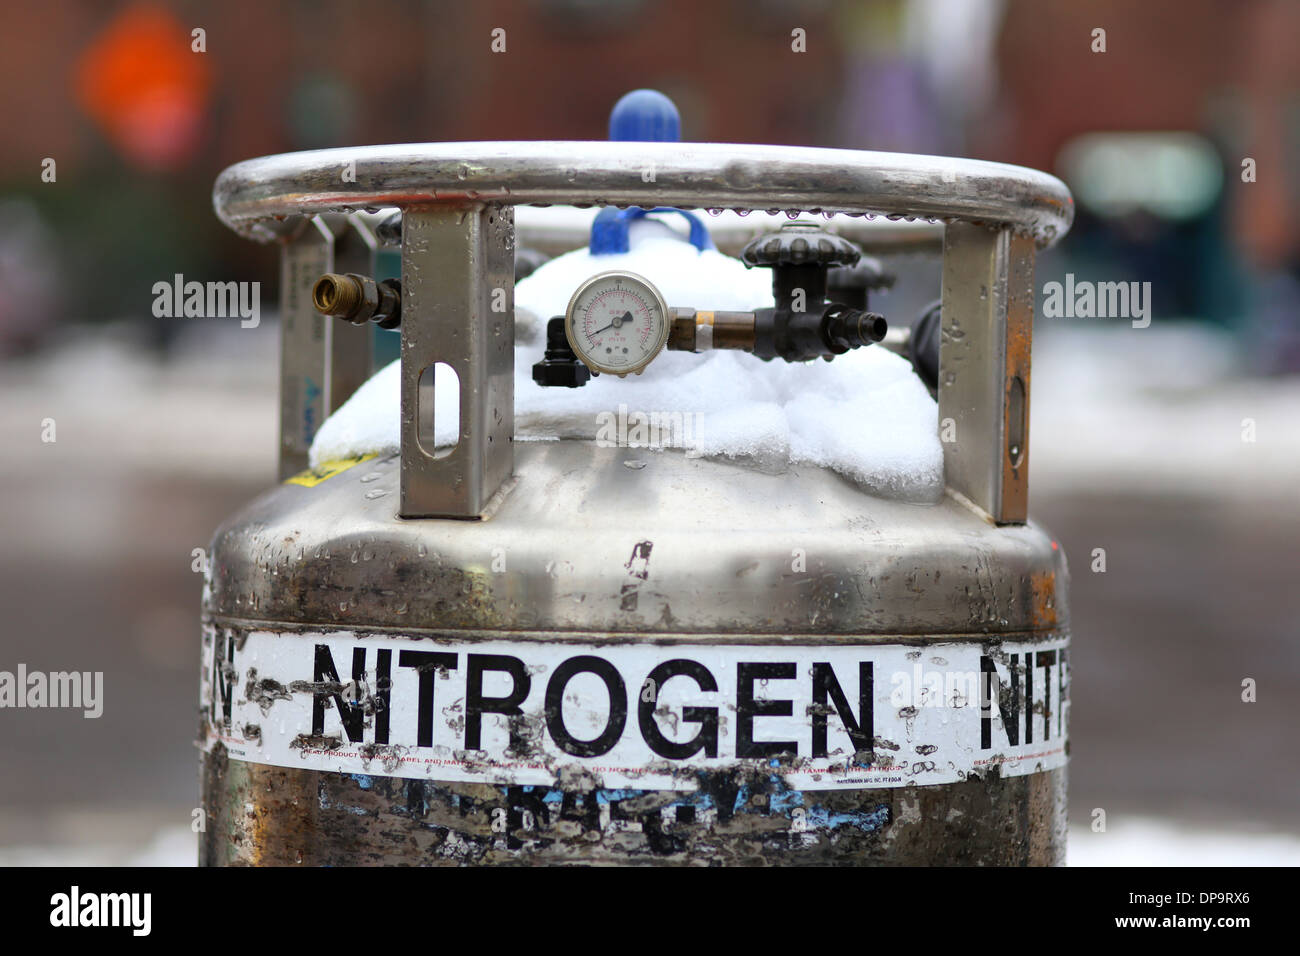 A tank of liquid nitrogen with a pressure gauge. Stock Photo